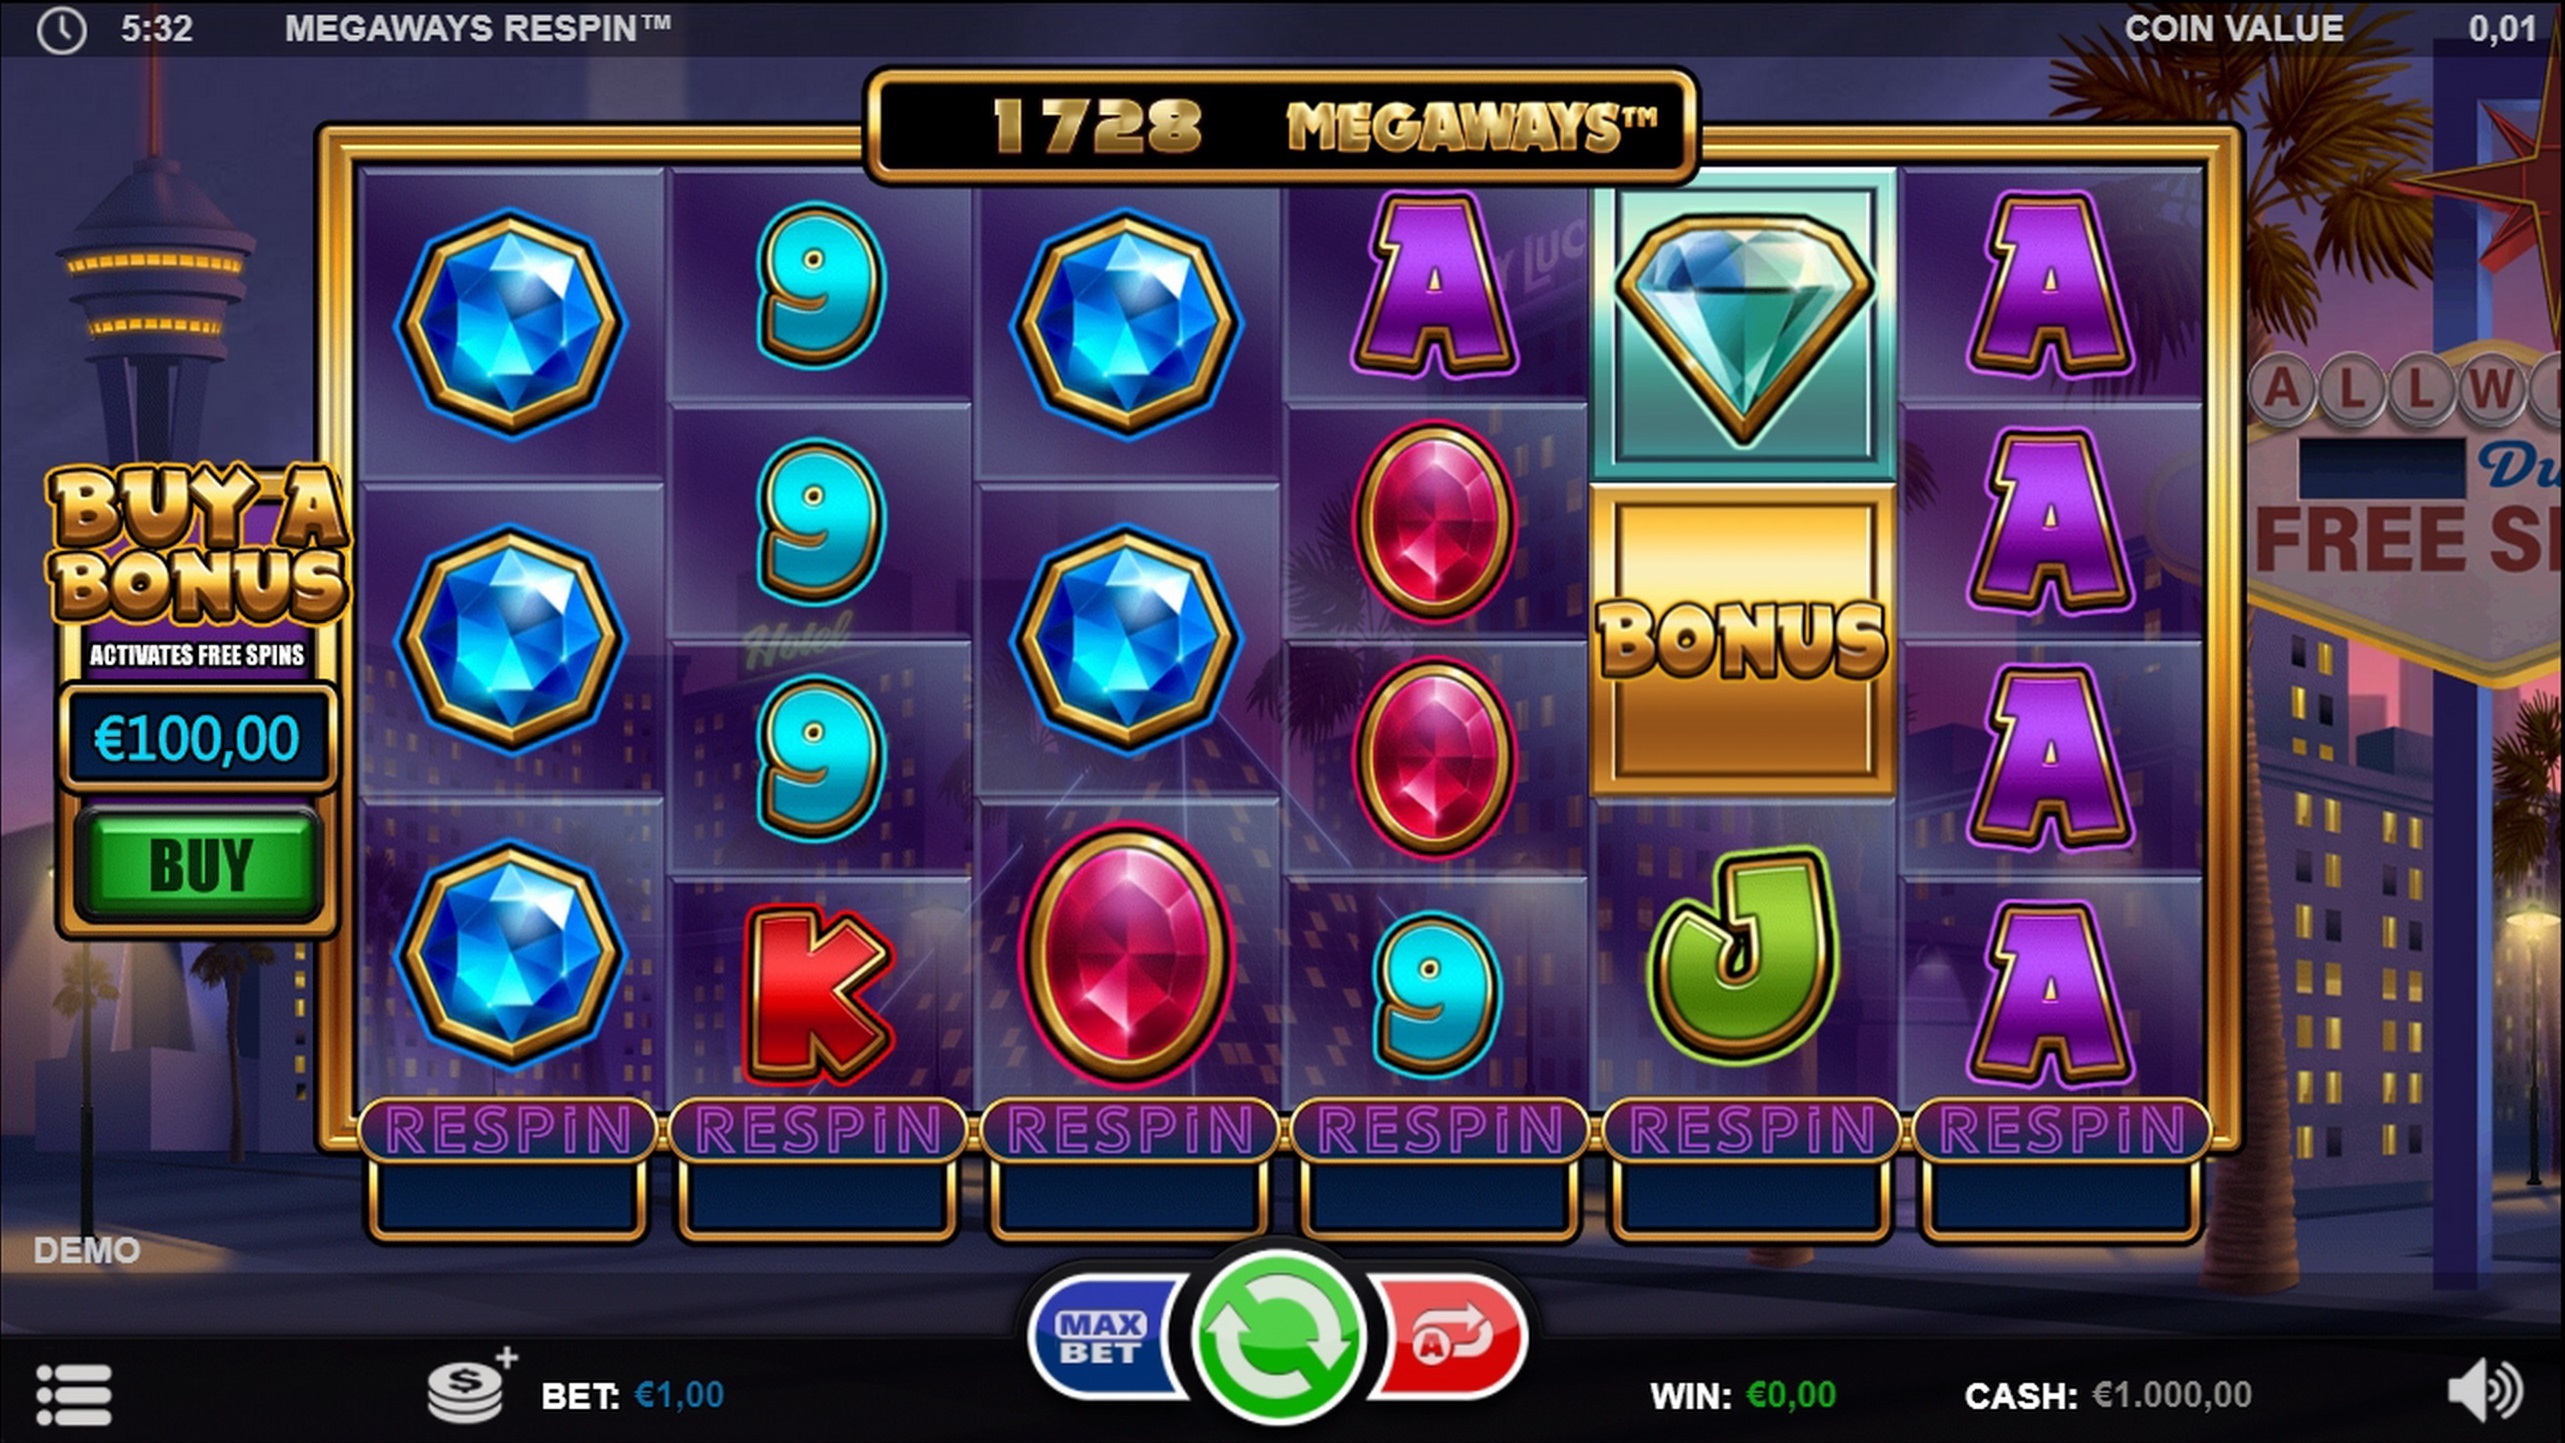 Reels in Megaways Respin Slot Game by Games Inc